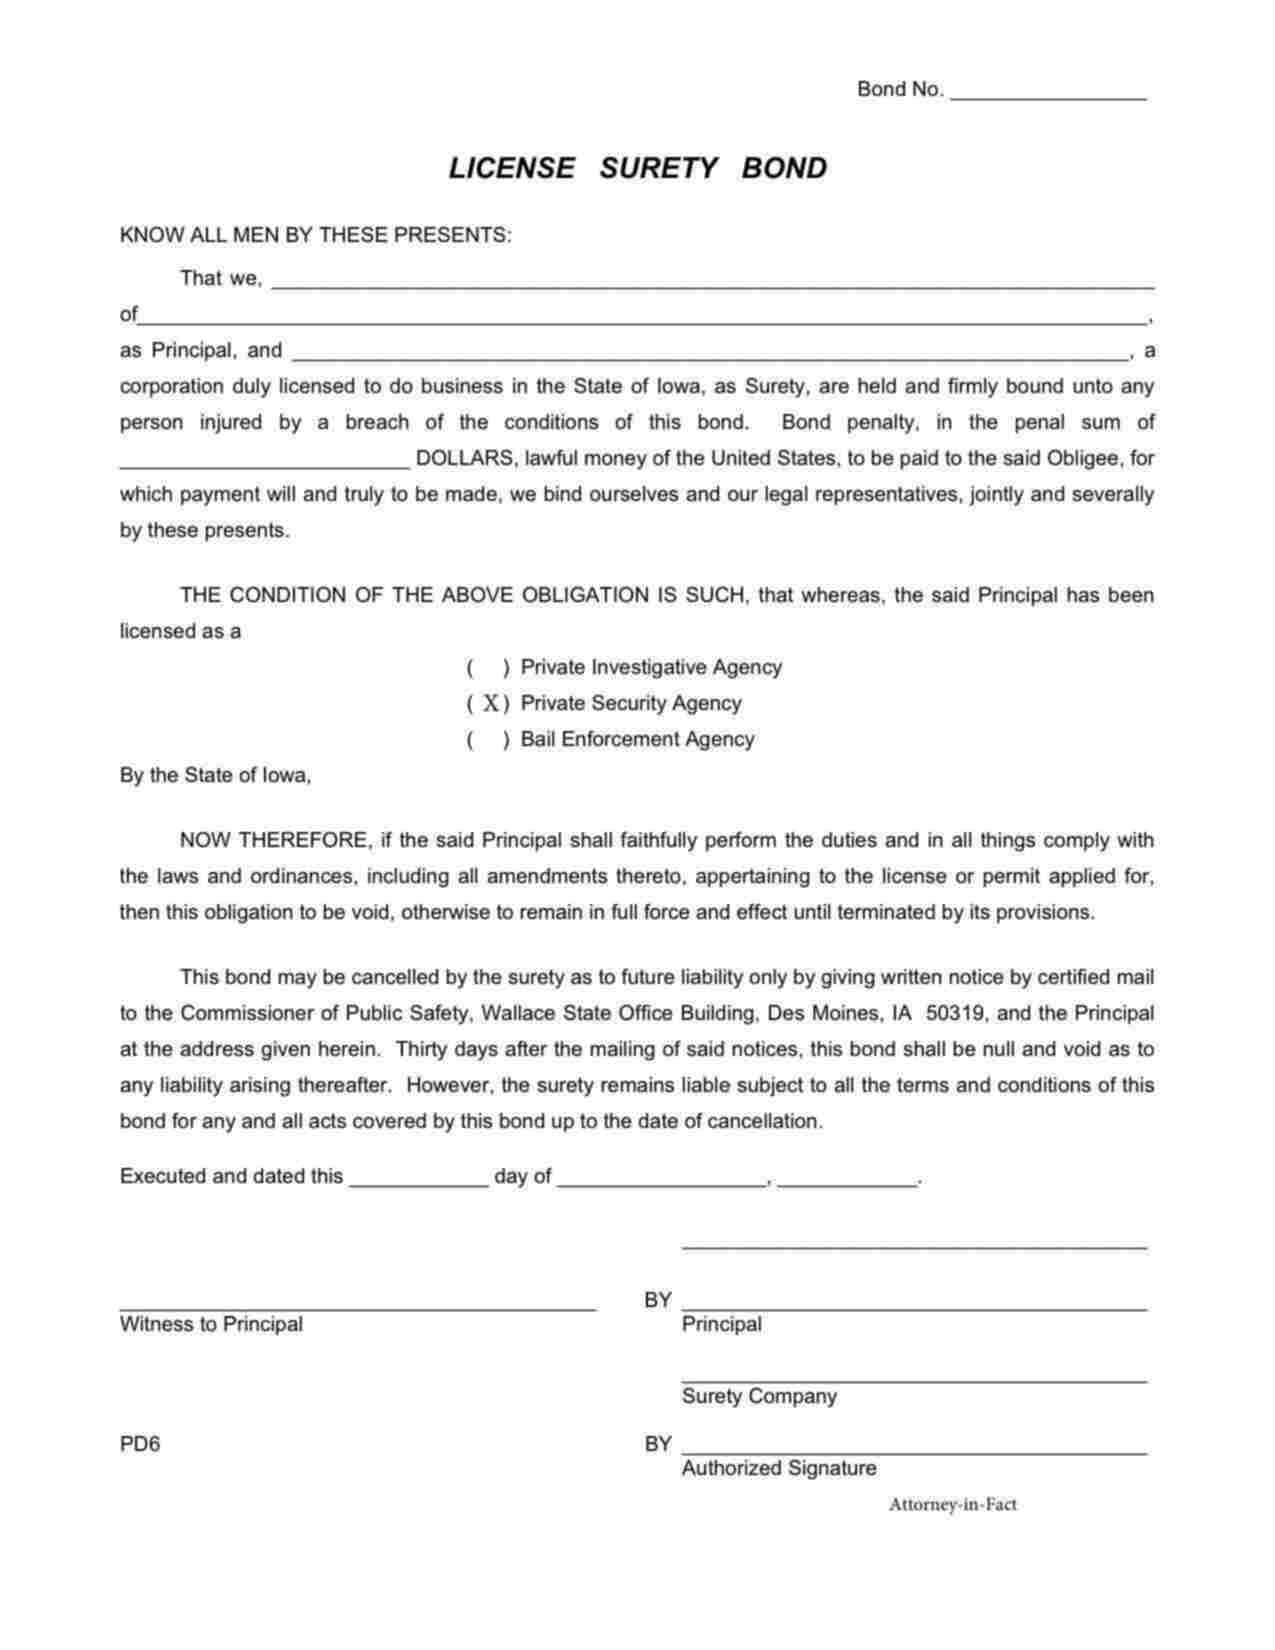 Iowa Private Security Agency Bond Form